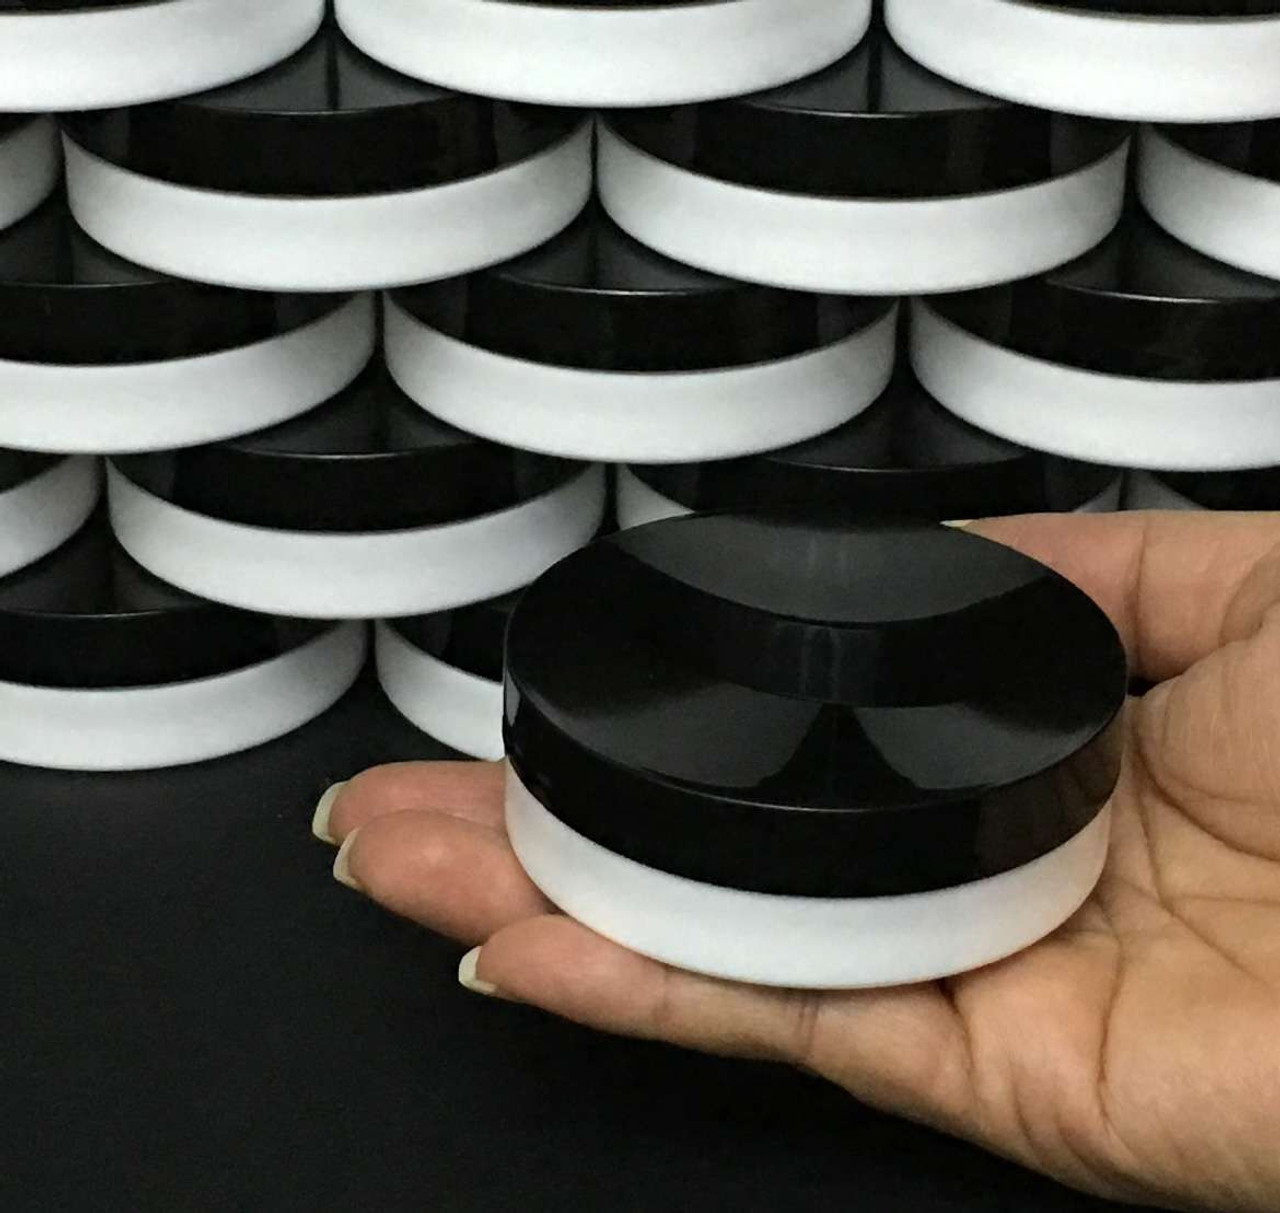 https://cdn11.bigcommerce.com/s-qd7k5gxi/images/stencil/1280x1280/products/481/7137/Plastic-Cosmetic-Containers-Low-Profile-Wide-Mouth-White-Jars-with-Lids-1-oz-White-Black-Cap-9351-9352-Beauty-Makeup-Supply_6348__44210.1661390819.jpg?c=2?imbypass=on